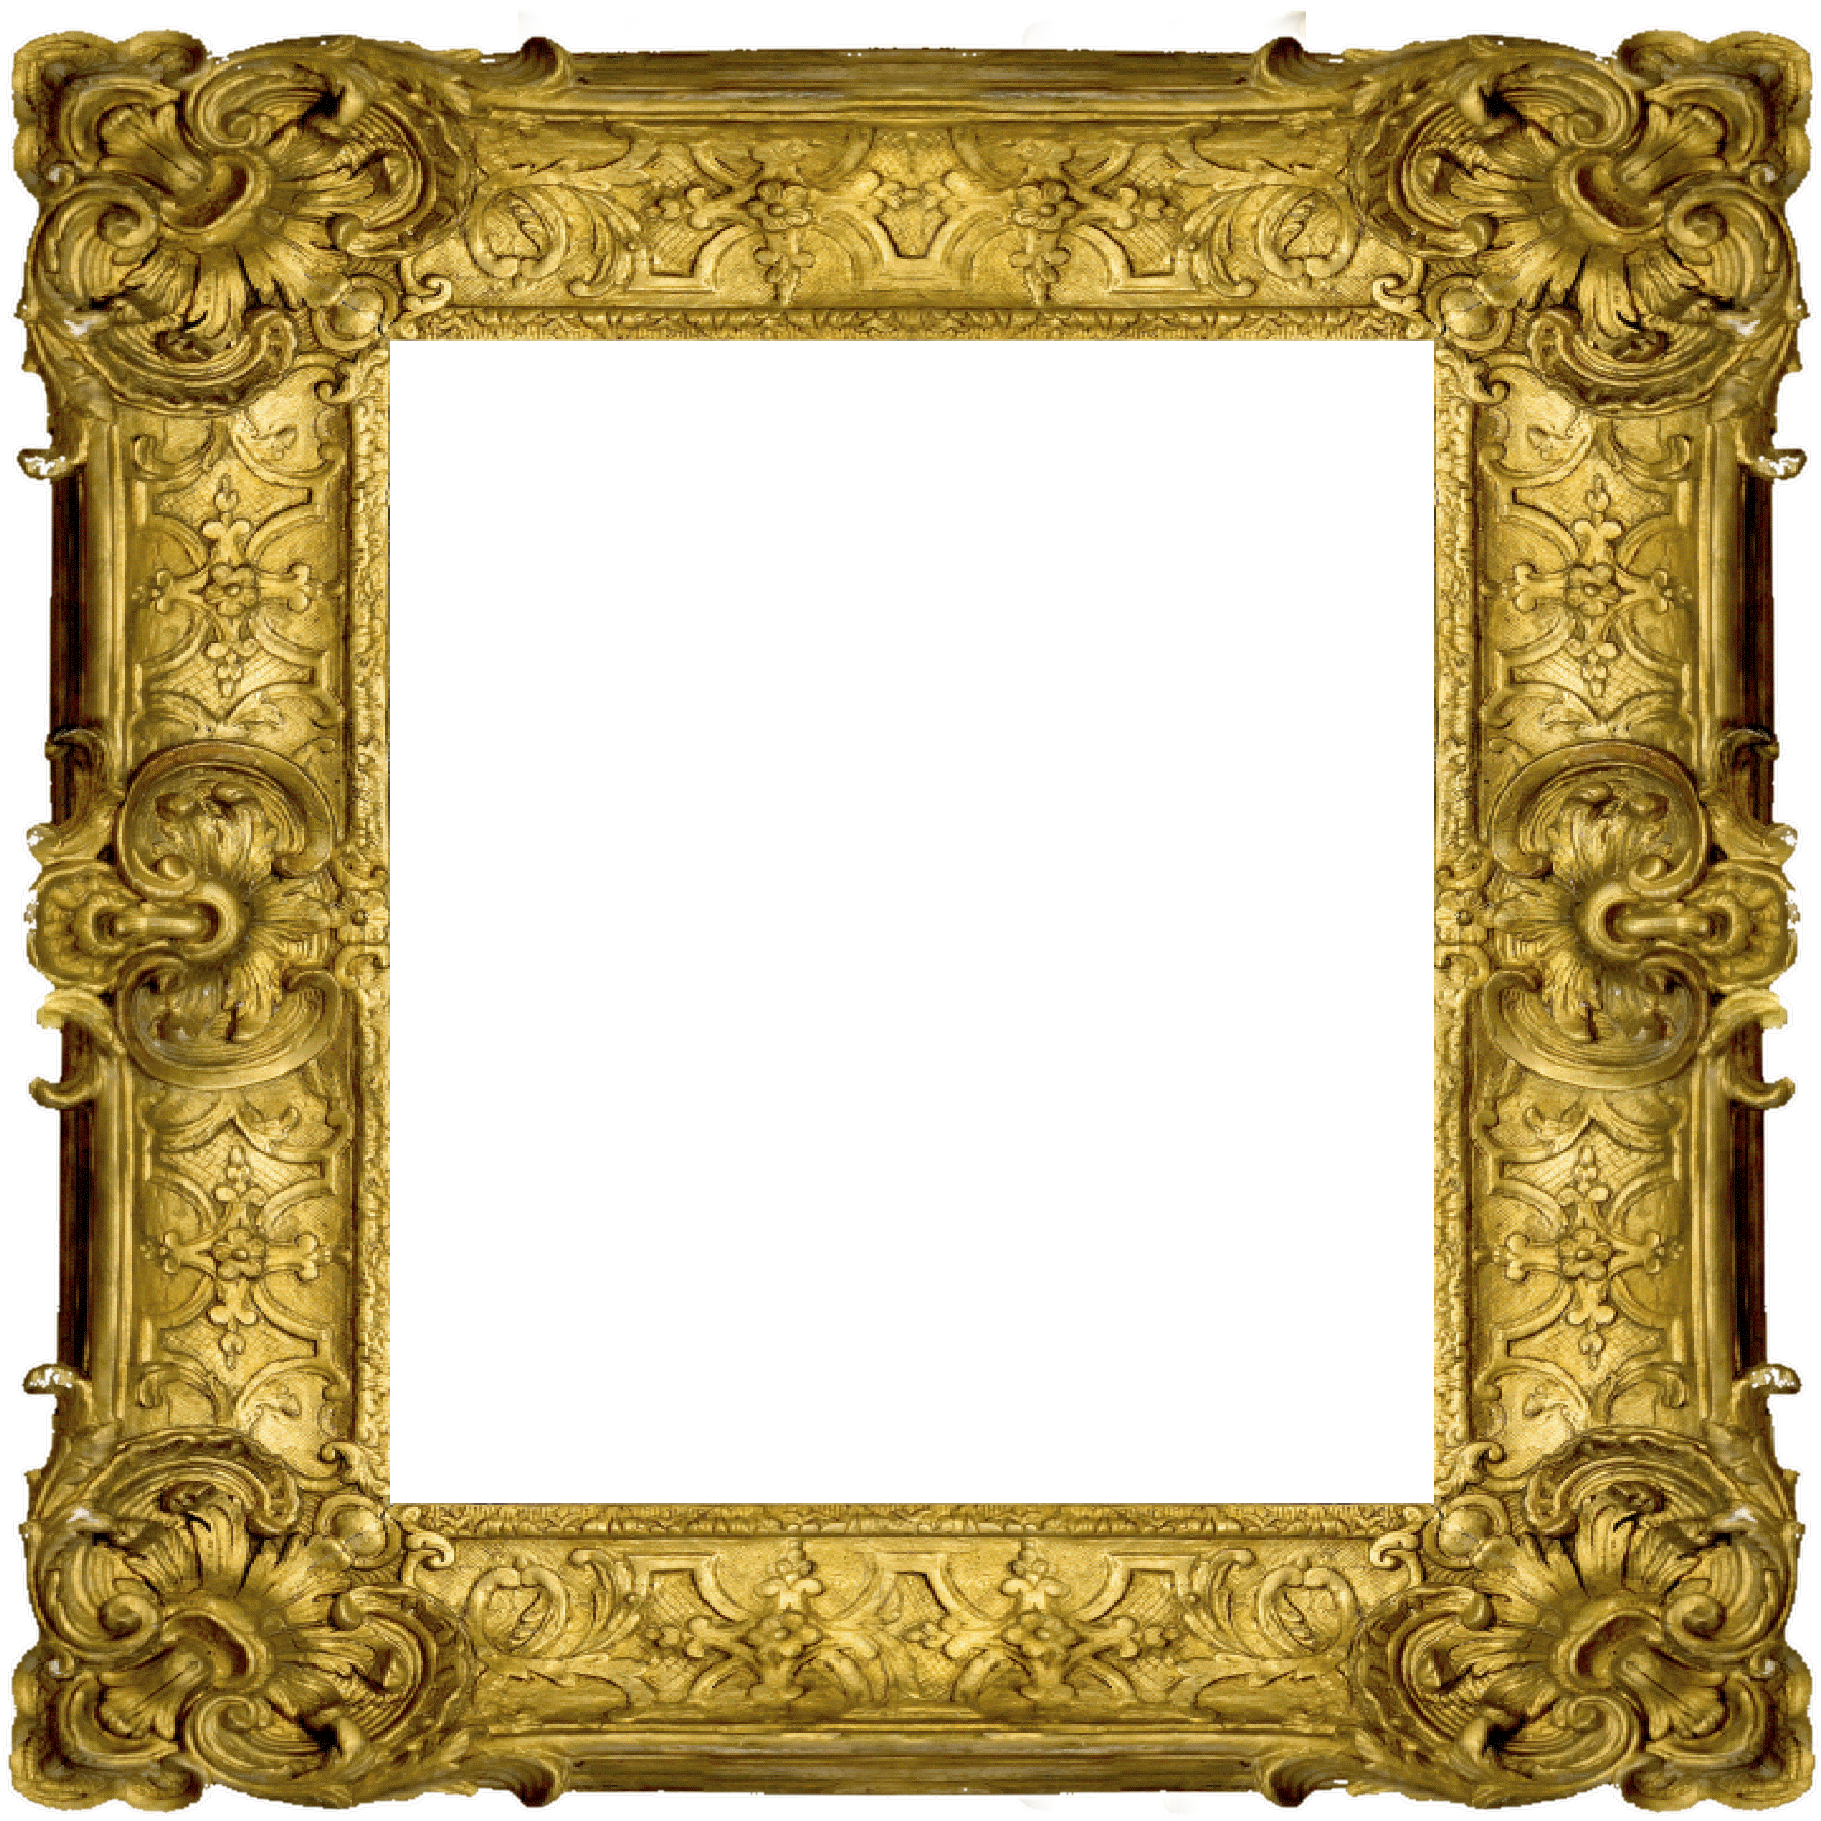 Gold border photos mart. Square picture frame png